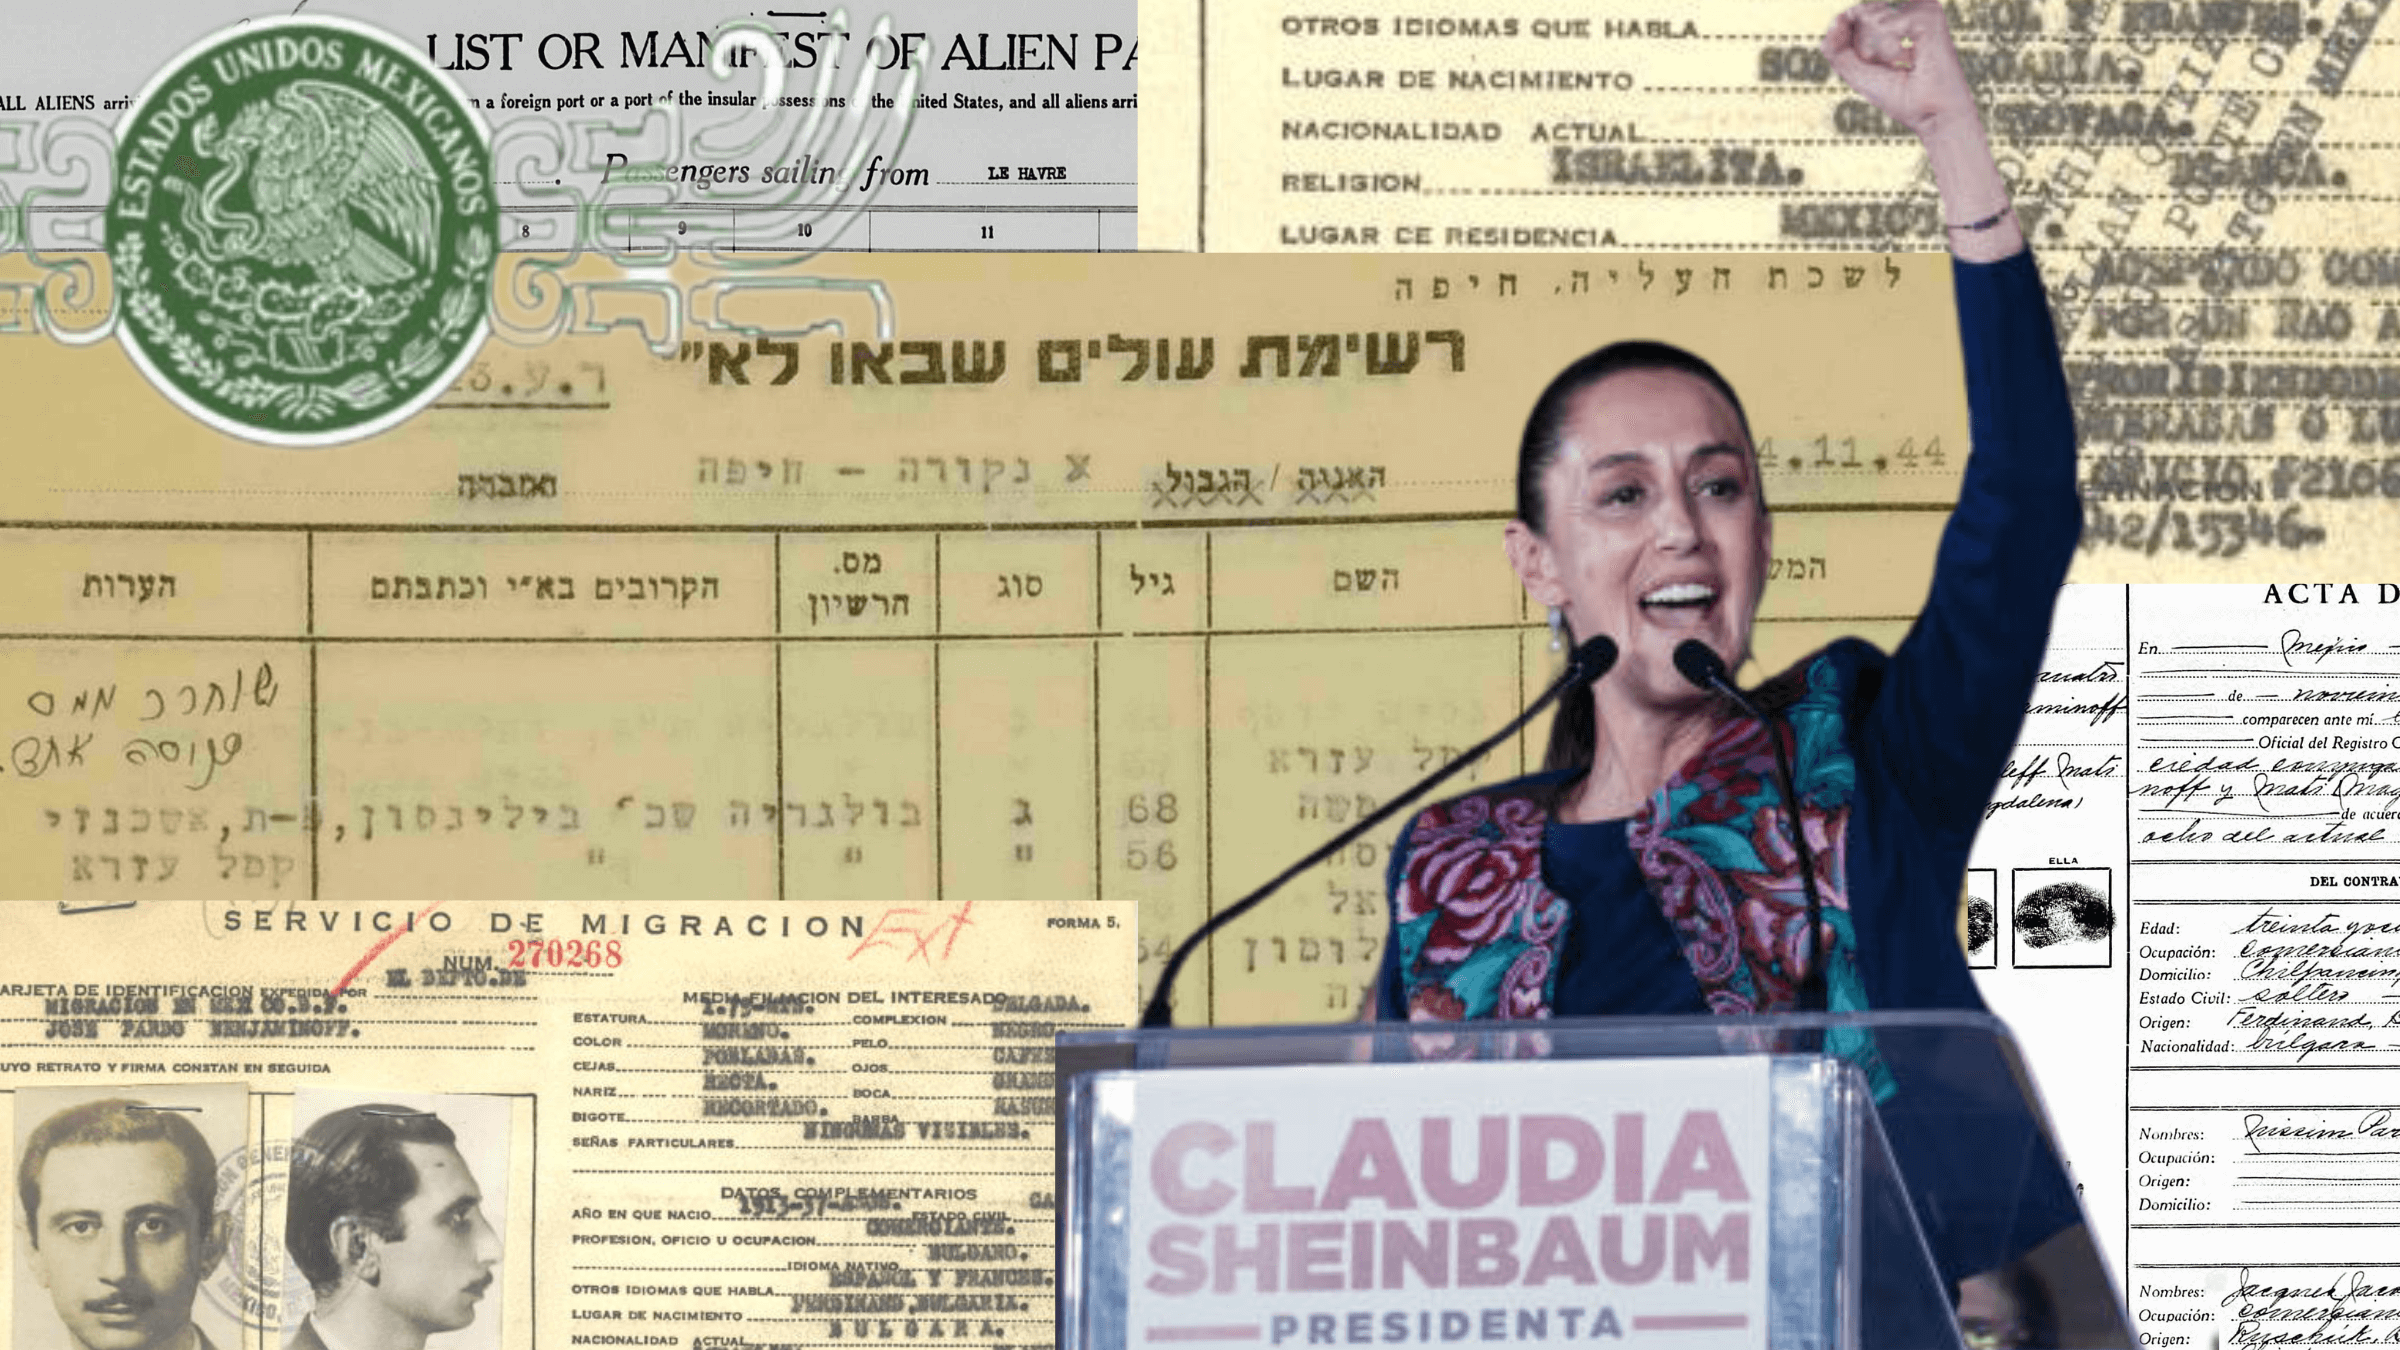 Mexico’s first female and first Jewish president, Claudia Sheinbaum, said her mother was born in Mexico. Geneological documents show she was born in Bulgaria and survived the Holocaust.